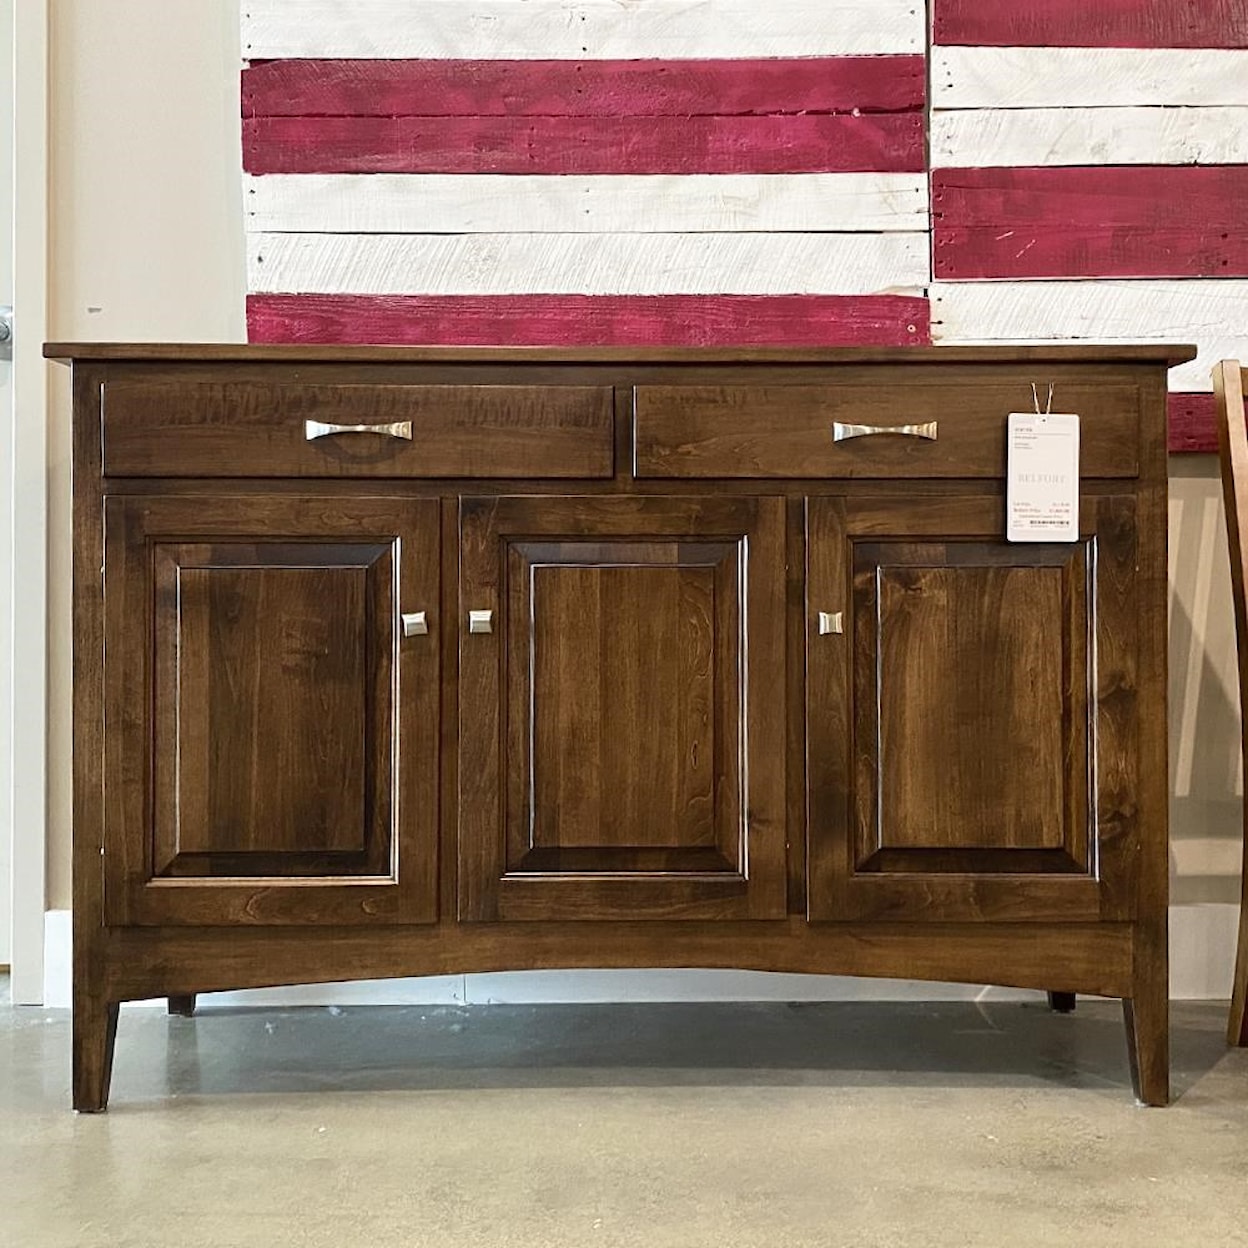 Archbold Furniture Amish Essentials Casual Dining Sideboards